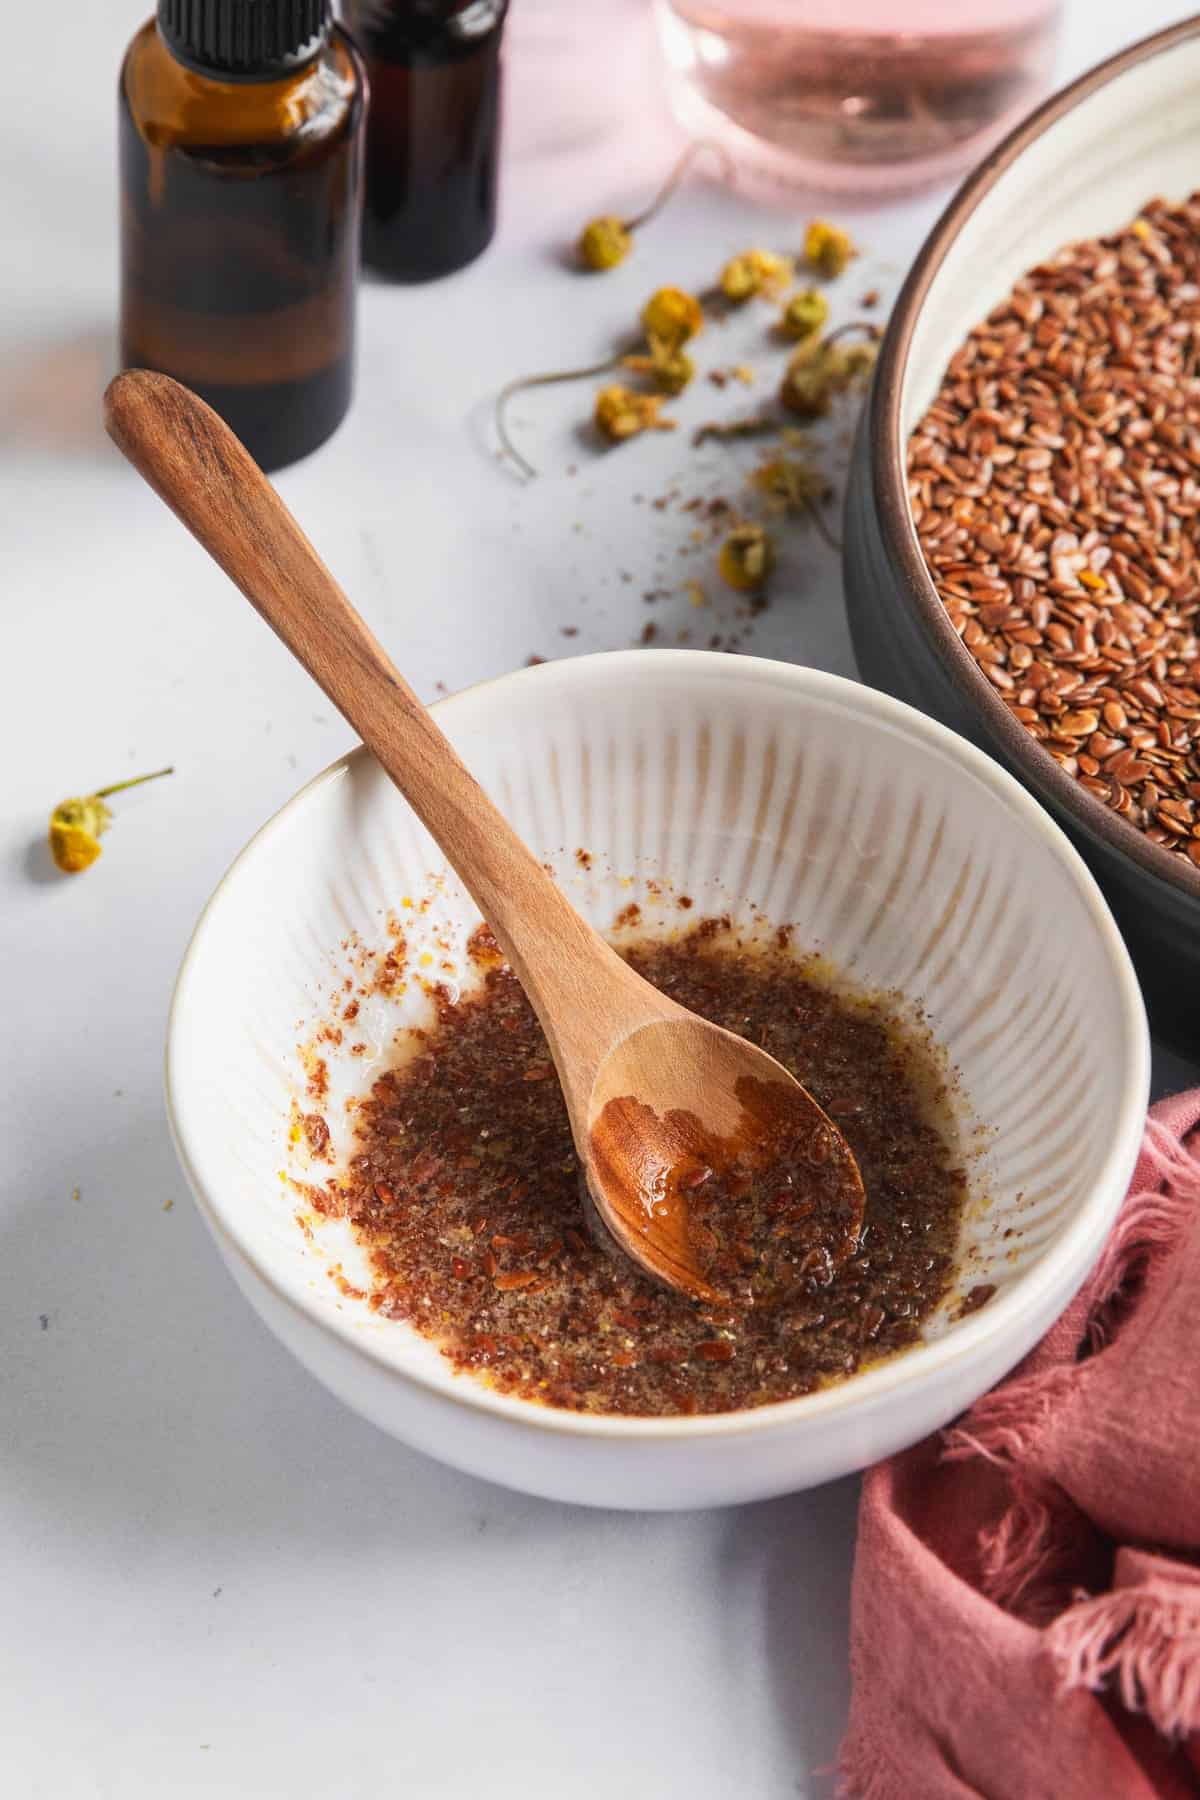 Combine flaxseed eye mask ingredients and let soak 10 min